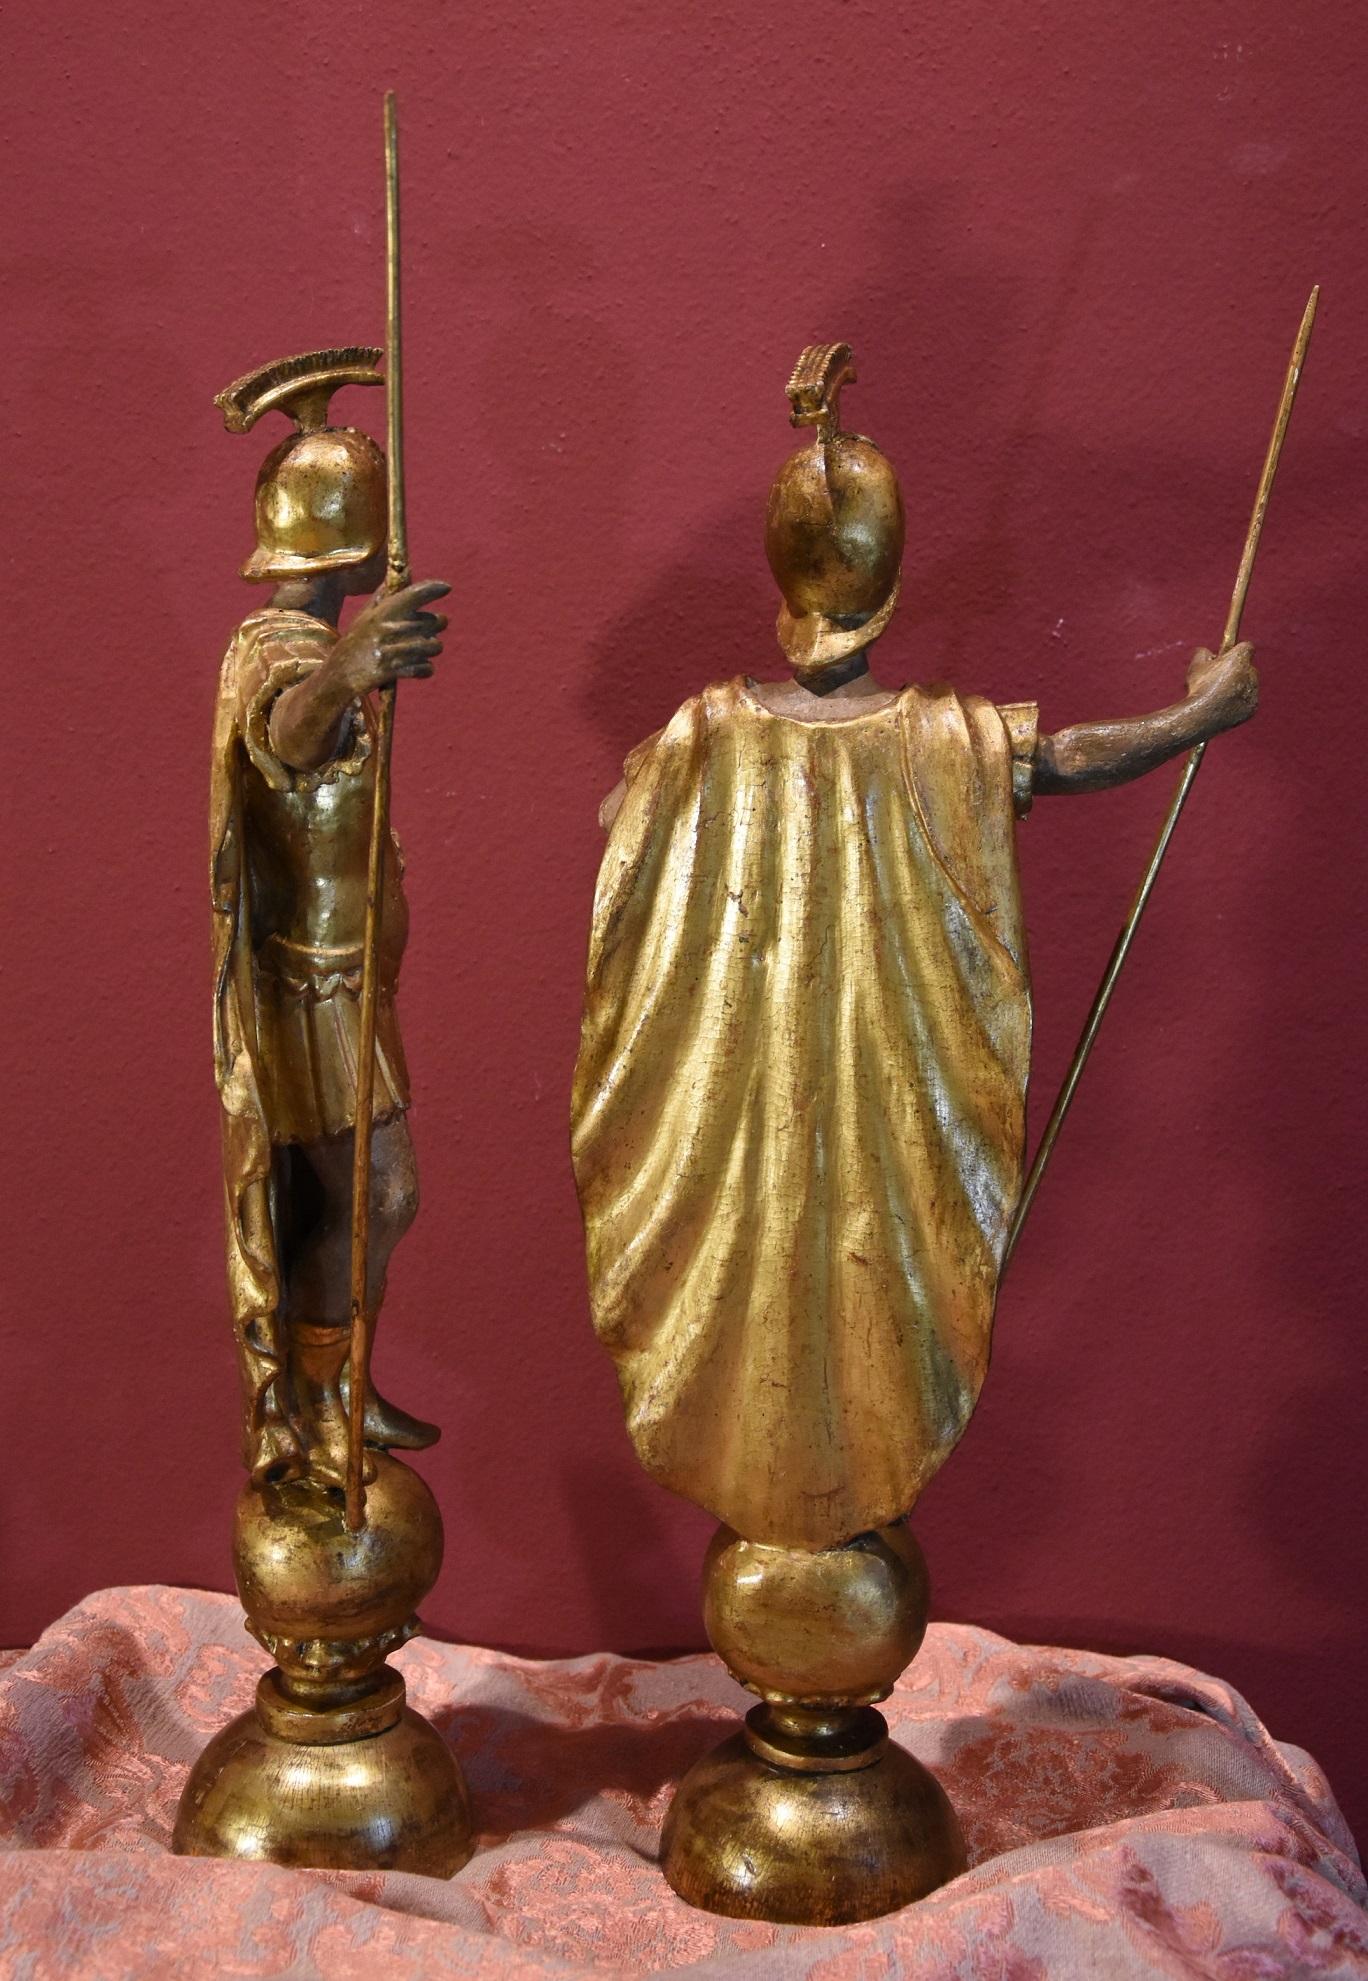 Wooden Sculptures Roman Soldiers Rome 18th Century Italy Art Gold For Sale 5